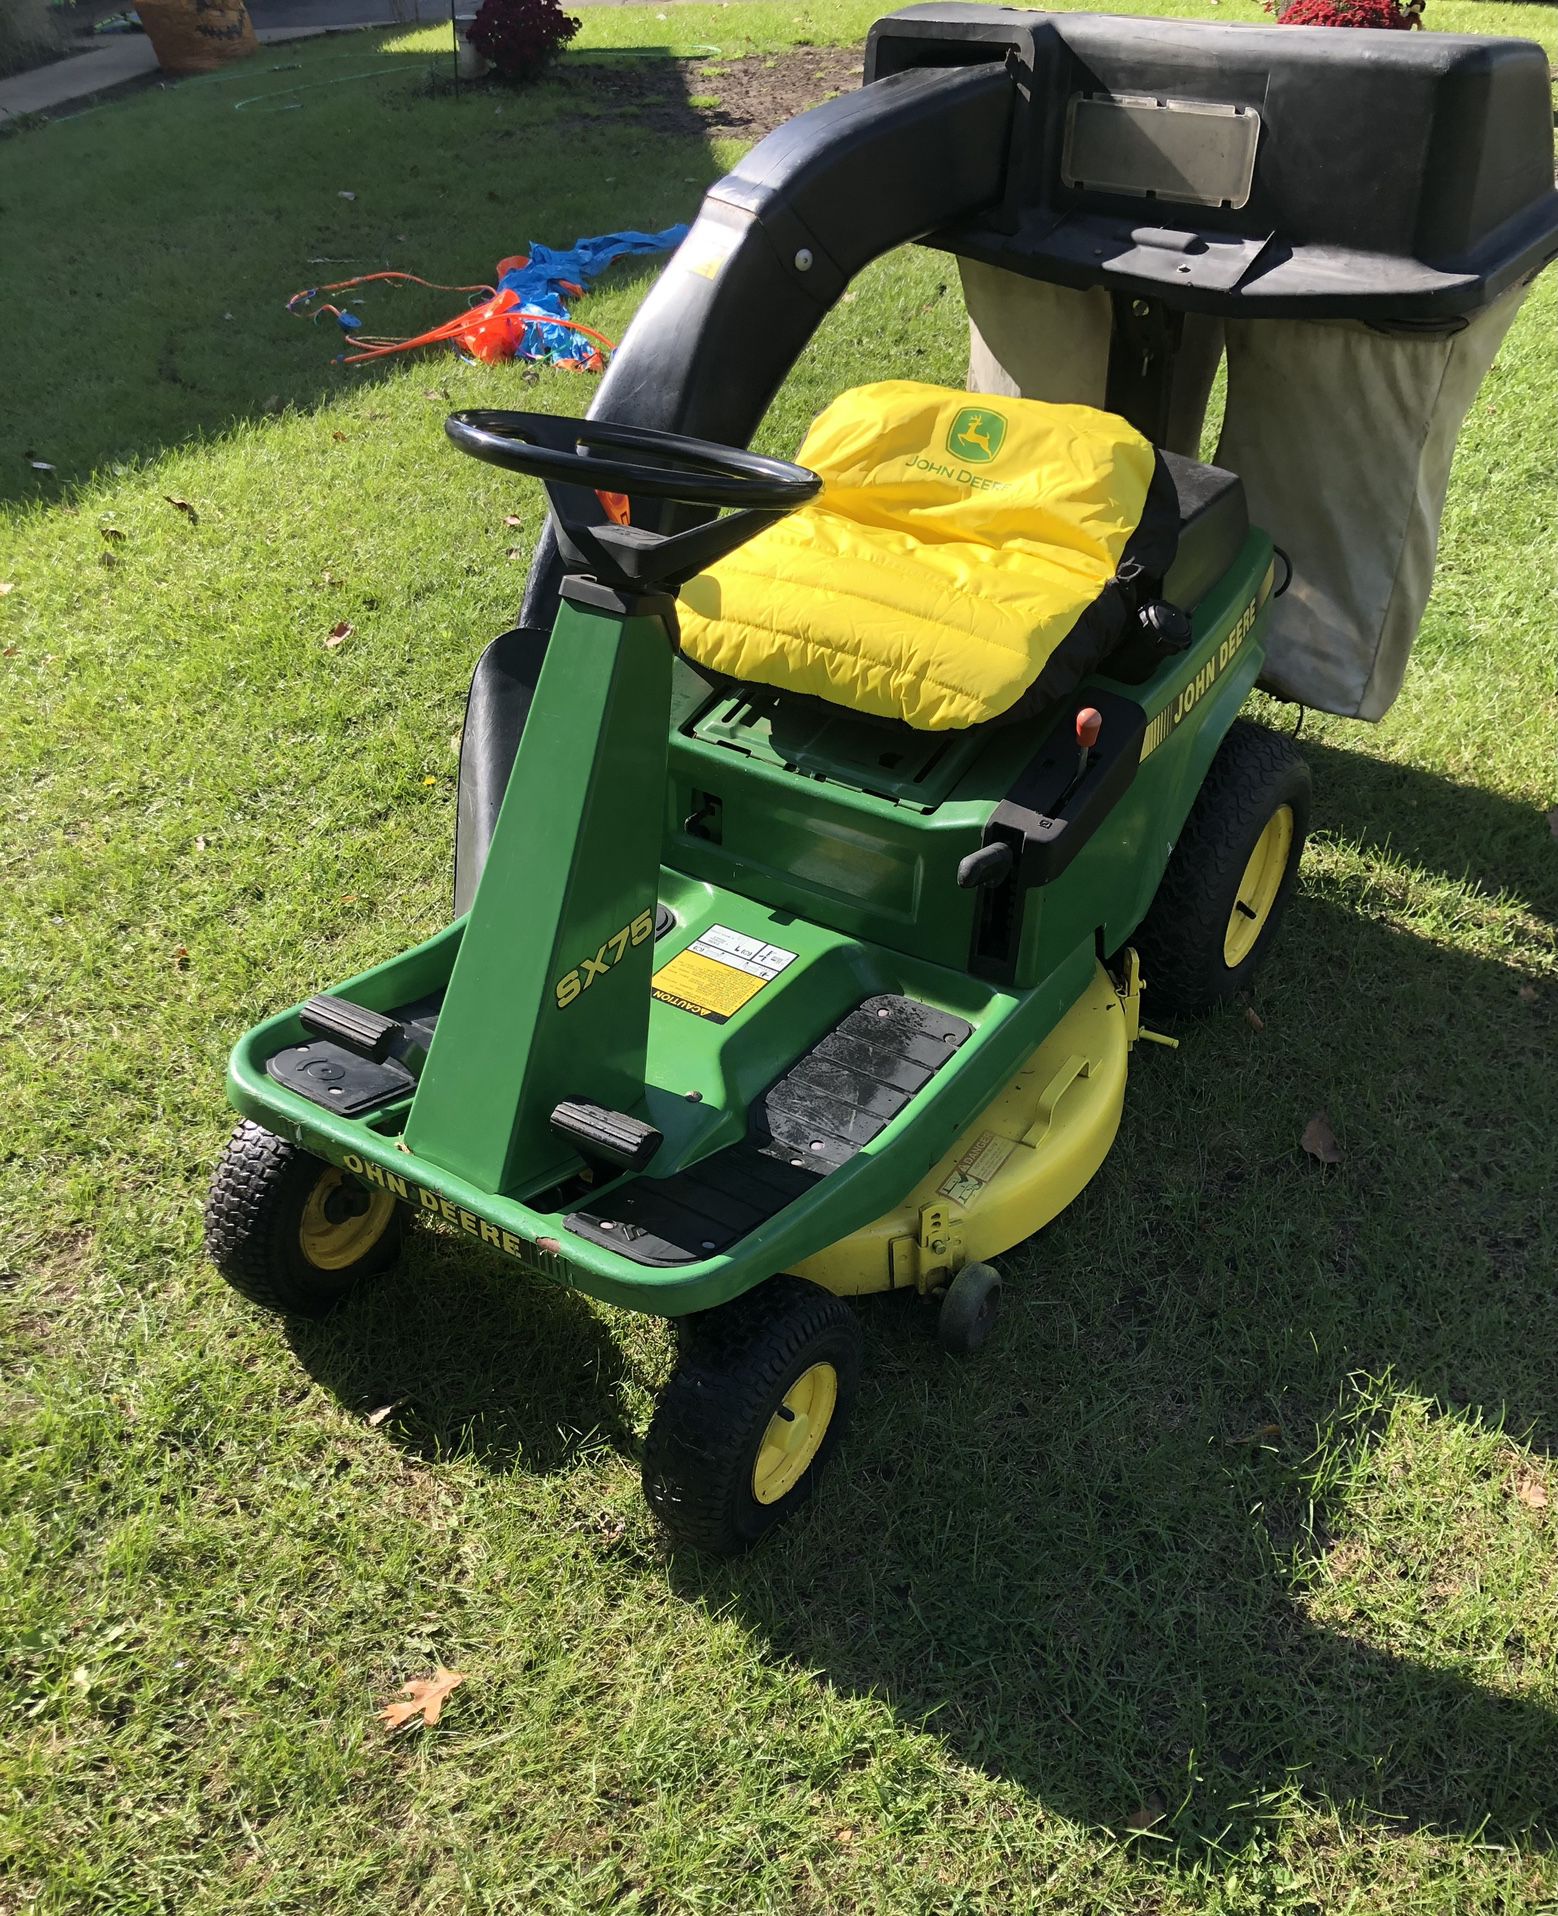 John Deere 30”  Lawn Mower With Bagger $550 Delivered